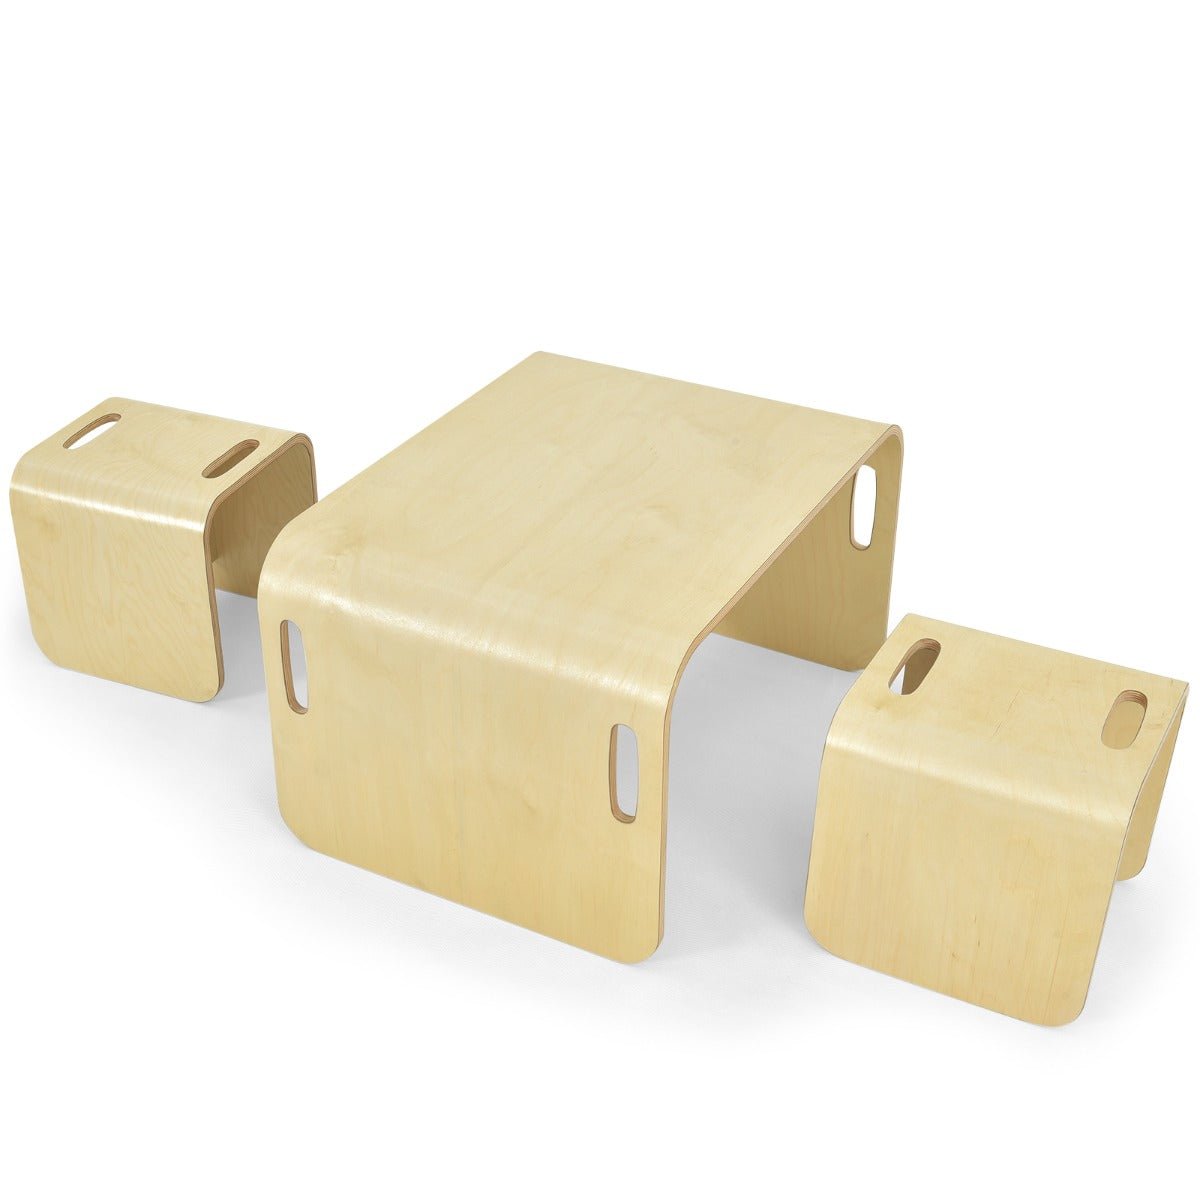 Shop Natural Convertible Kids Table and Chair Set - Versatile and Stylish